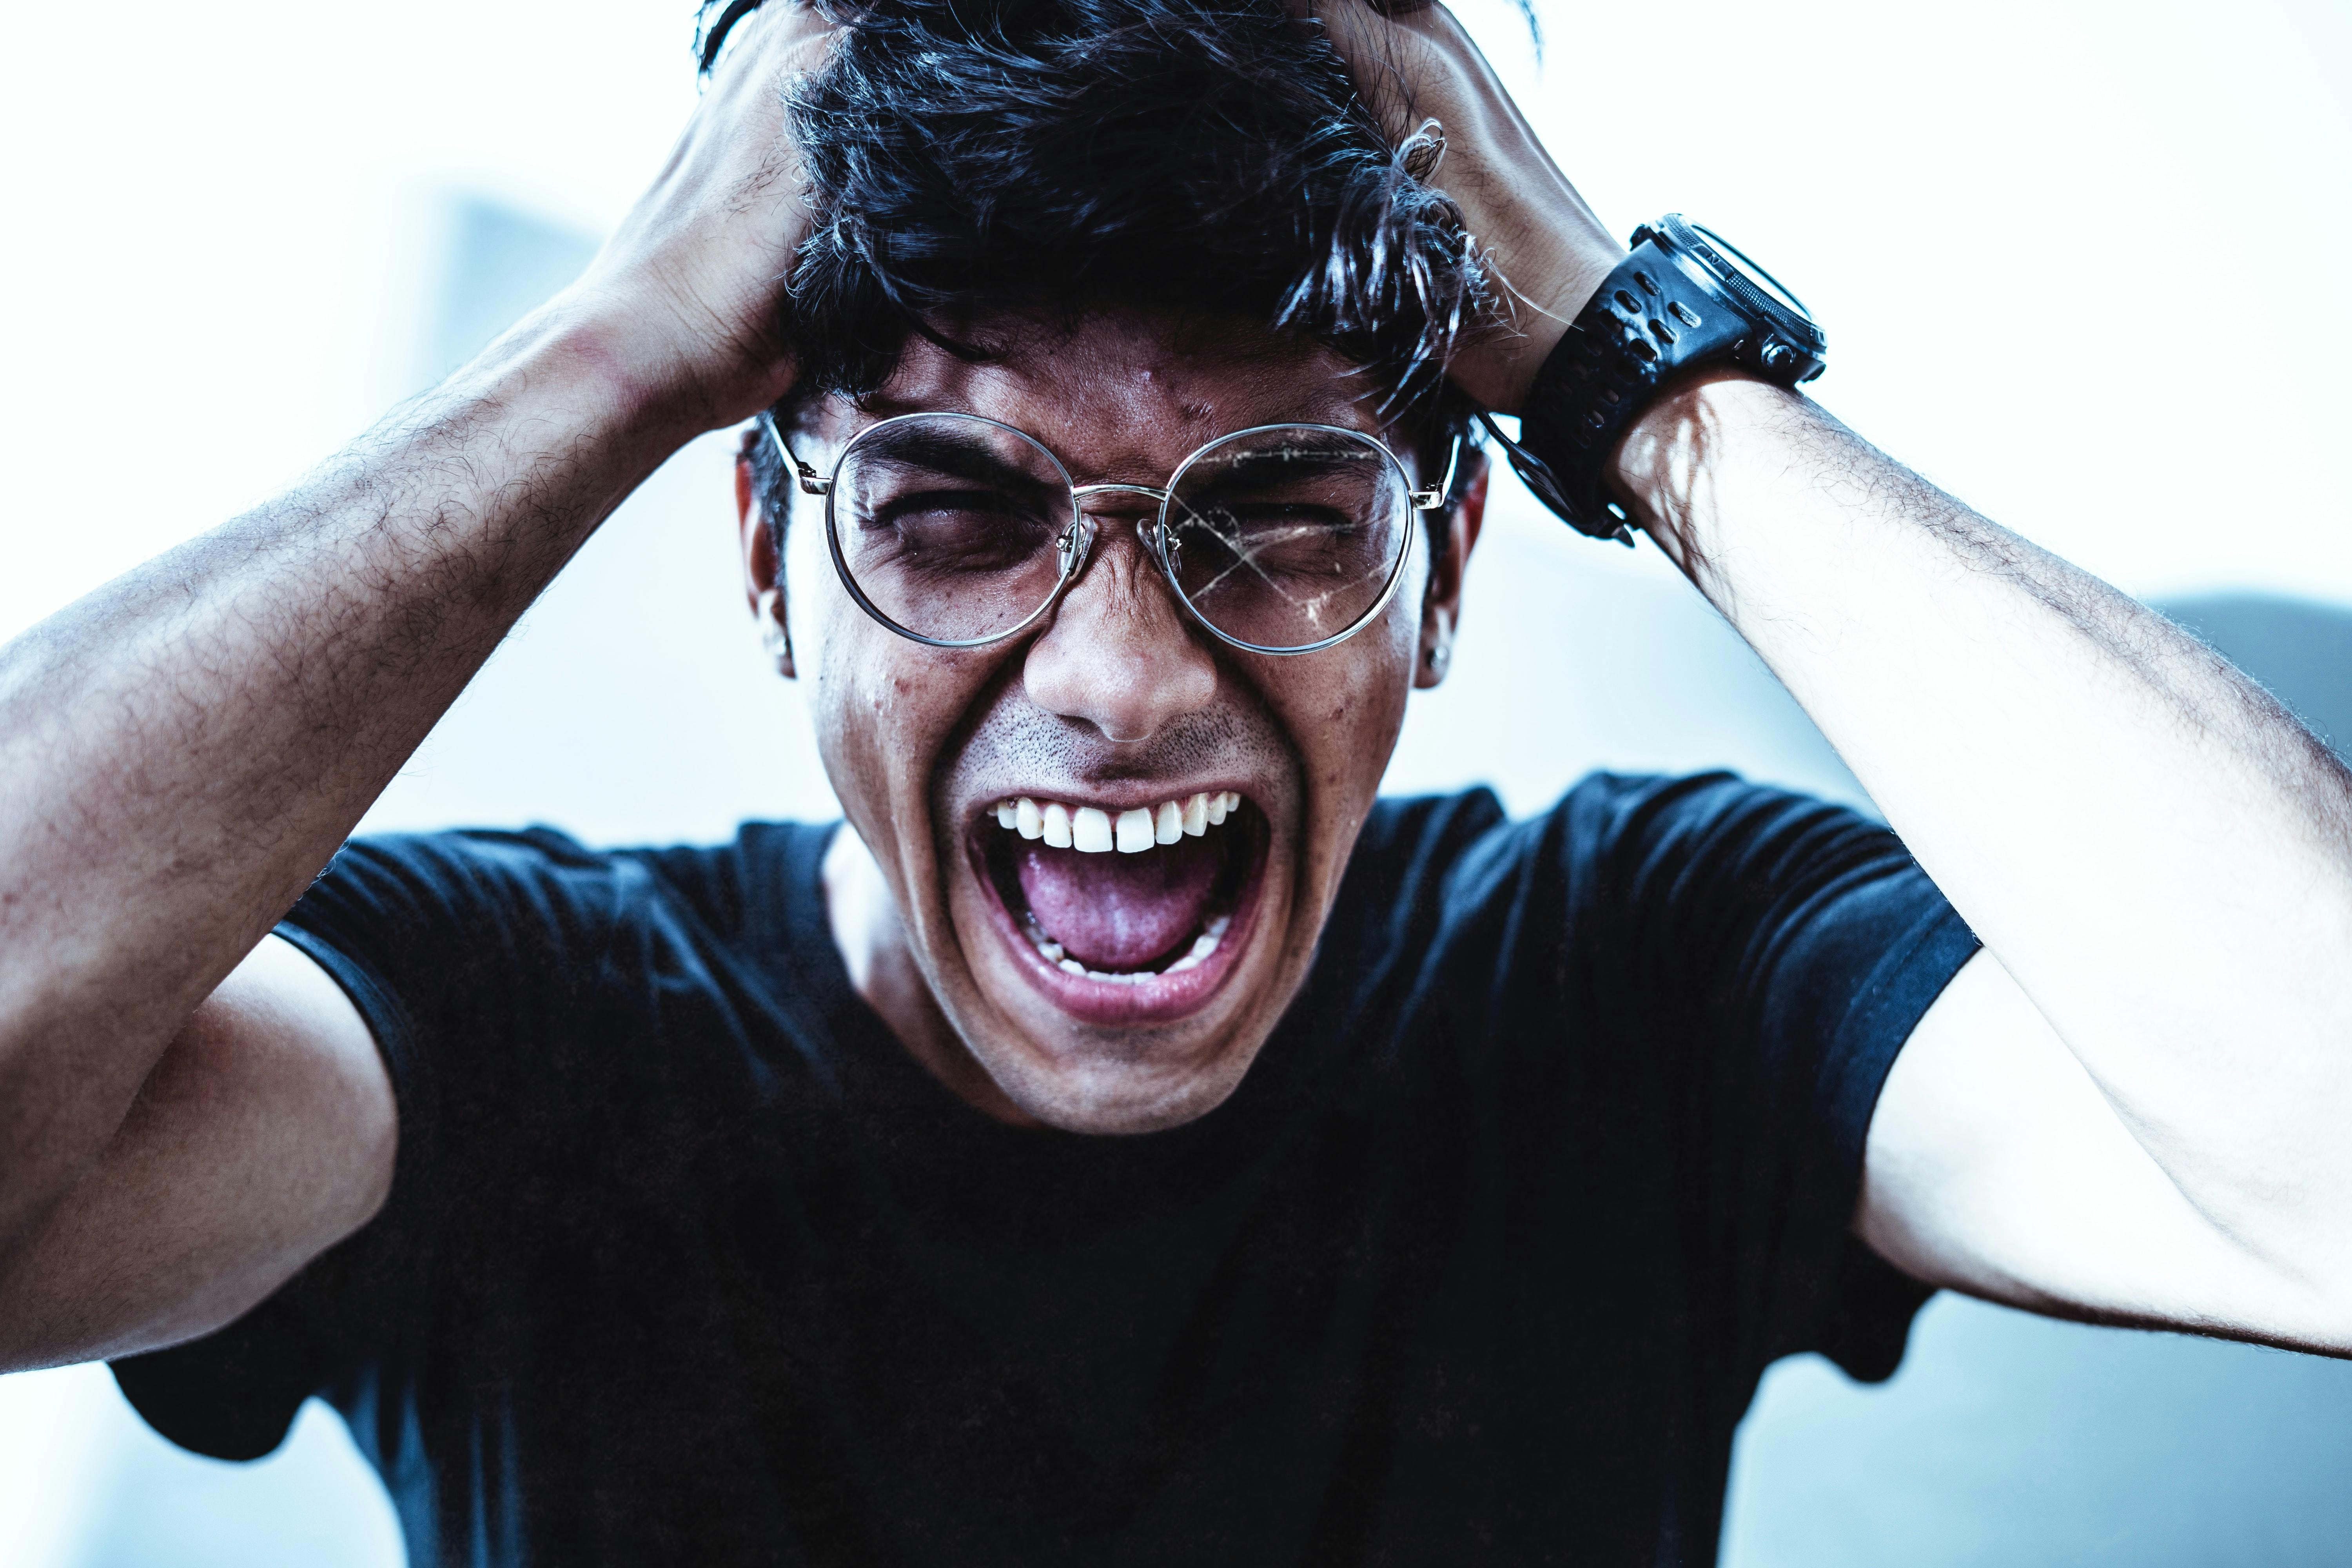 Man with anxiety, wearing broken glasses and screaming